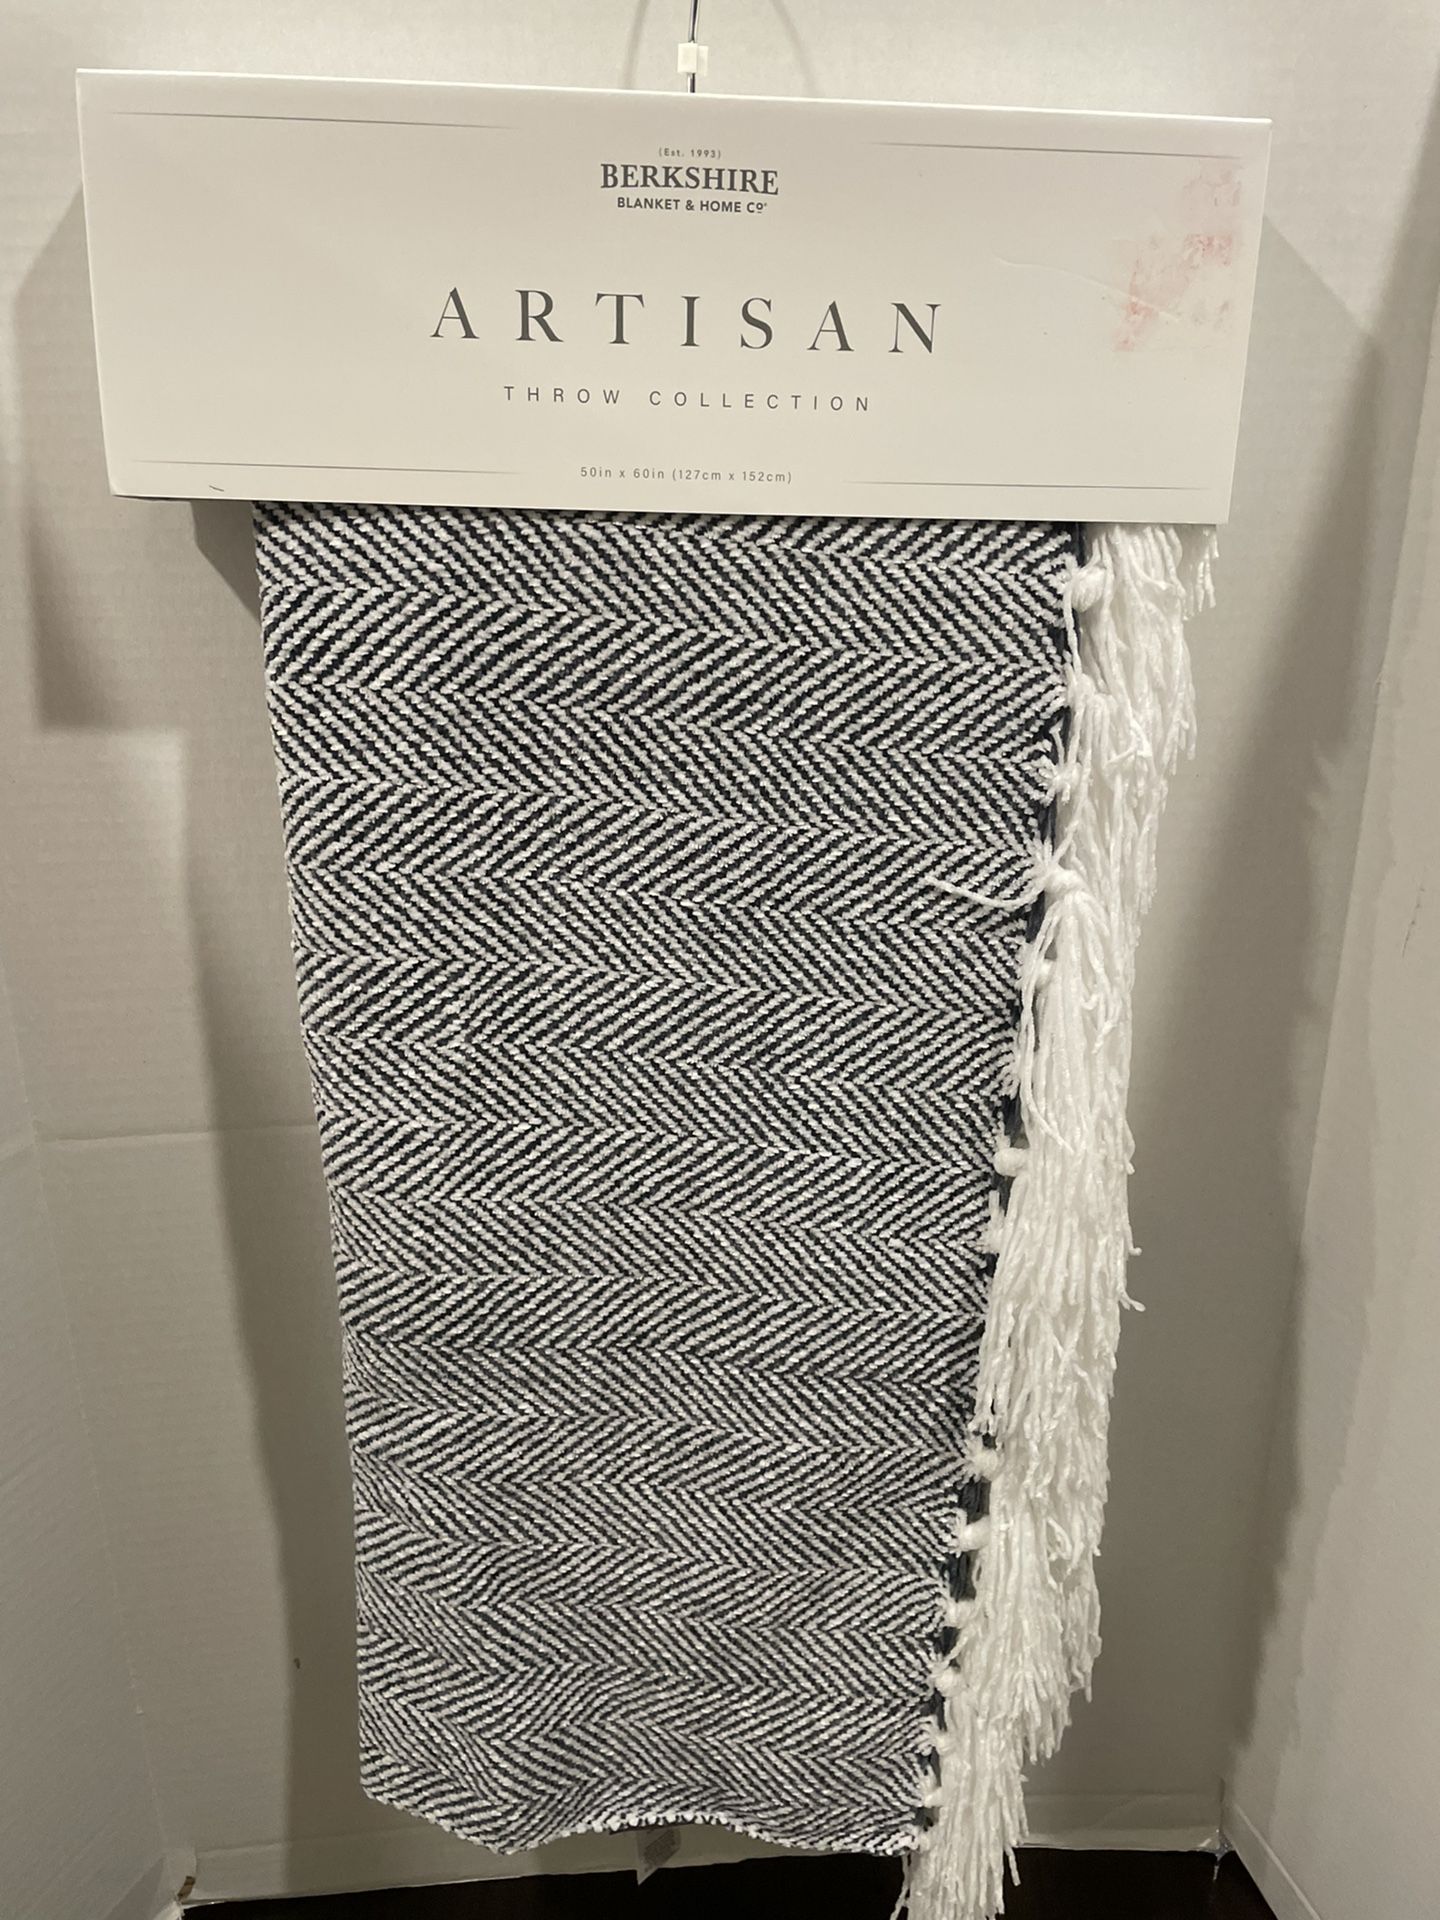 Berkshire Blanket Throw Artisan Collection Brand New Color Demin Asking $25